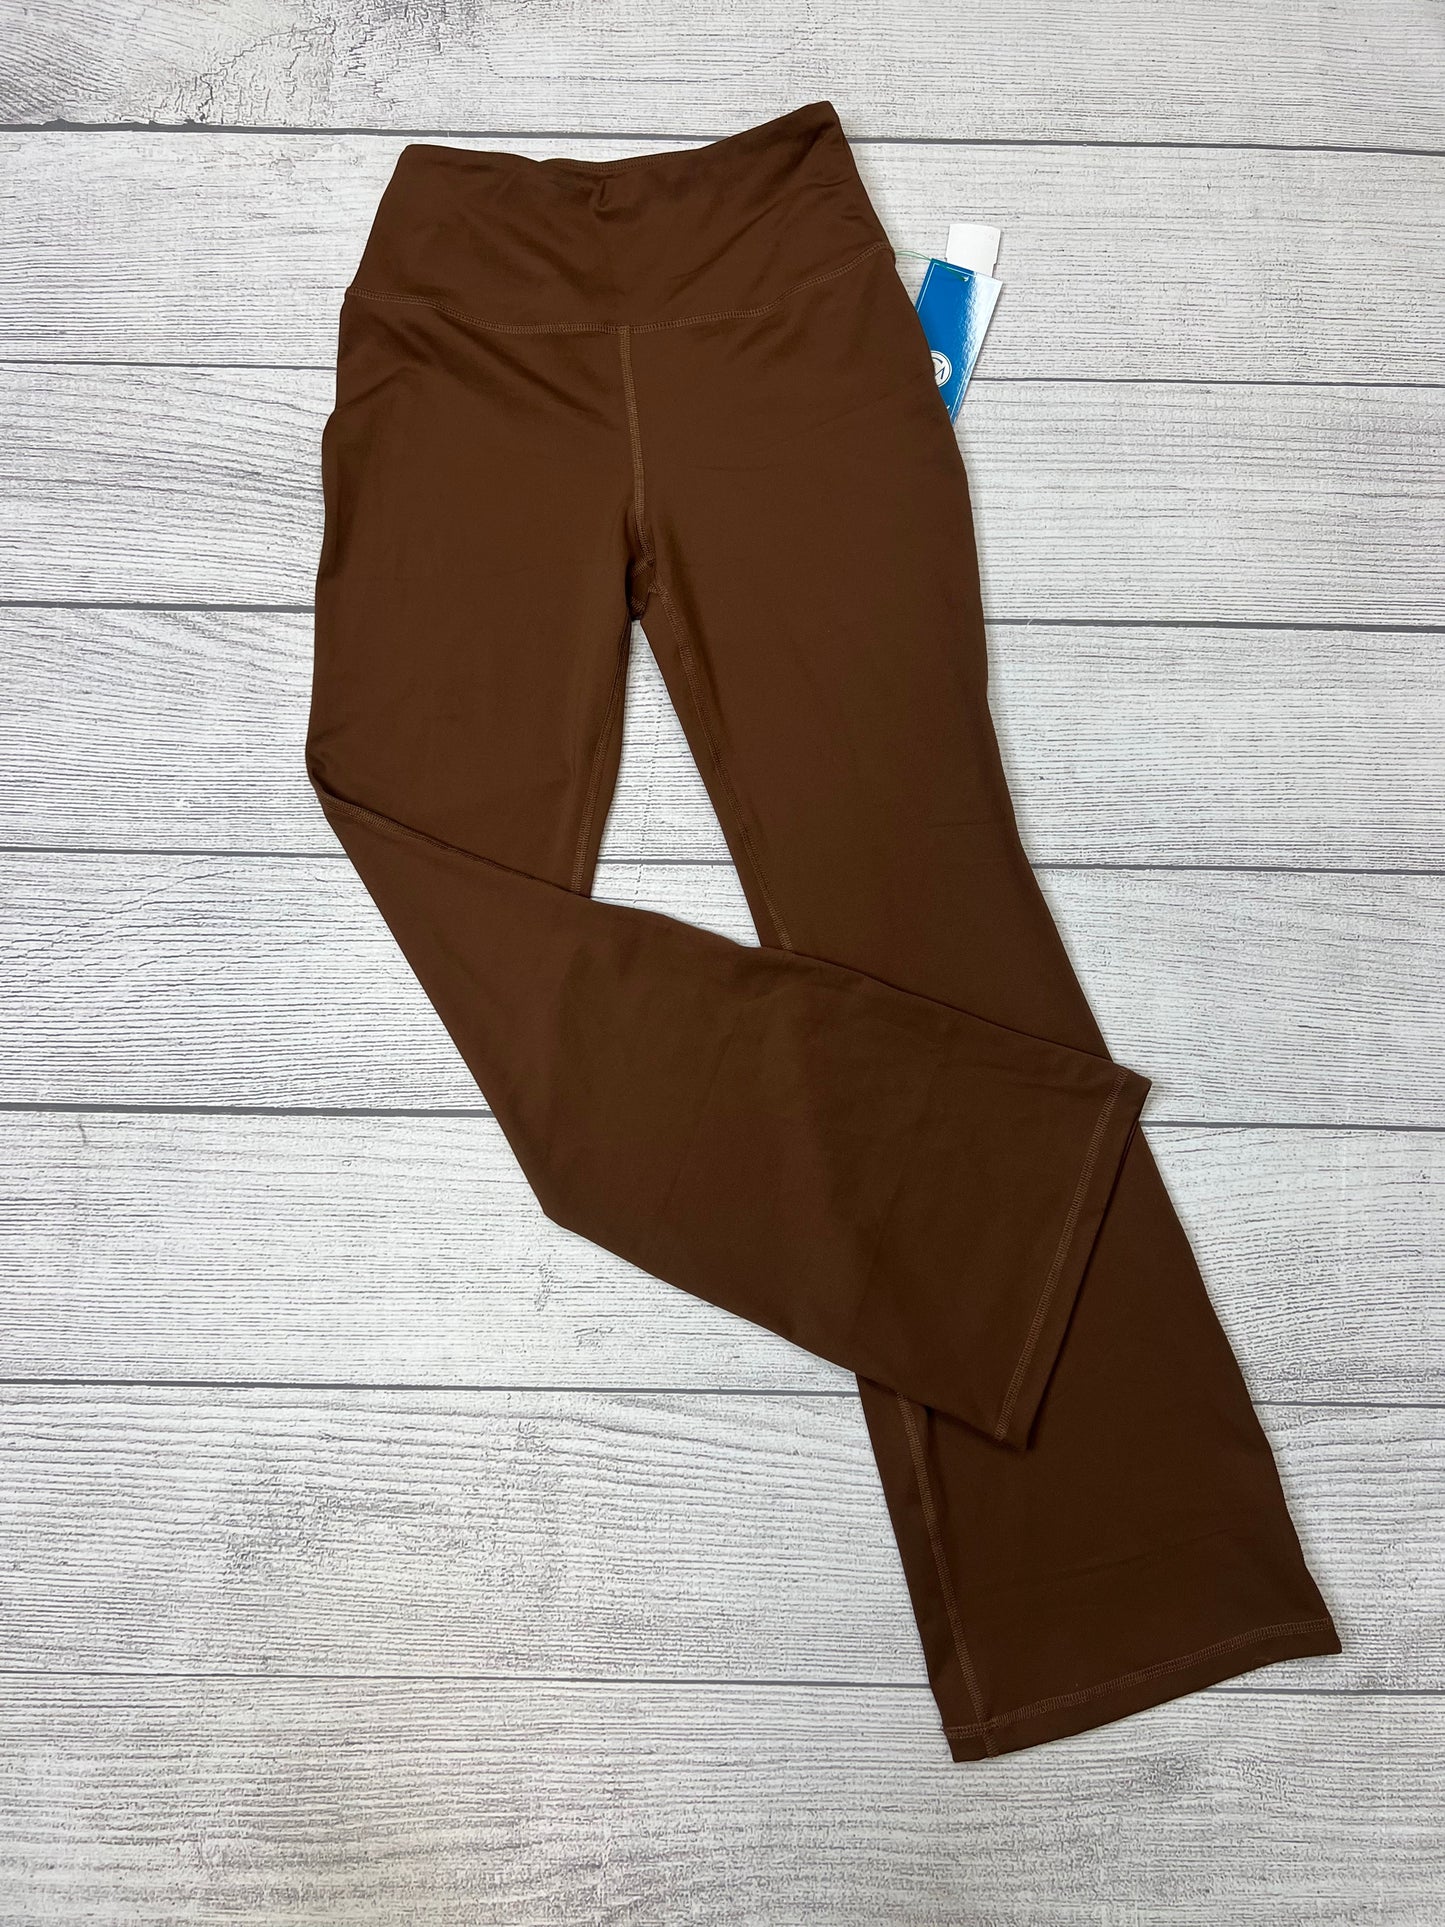 Athletic Leggings By Madewell  Size: M